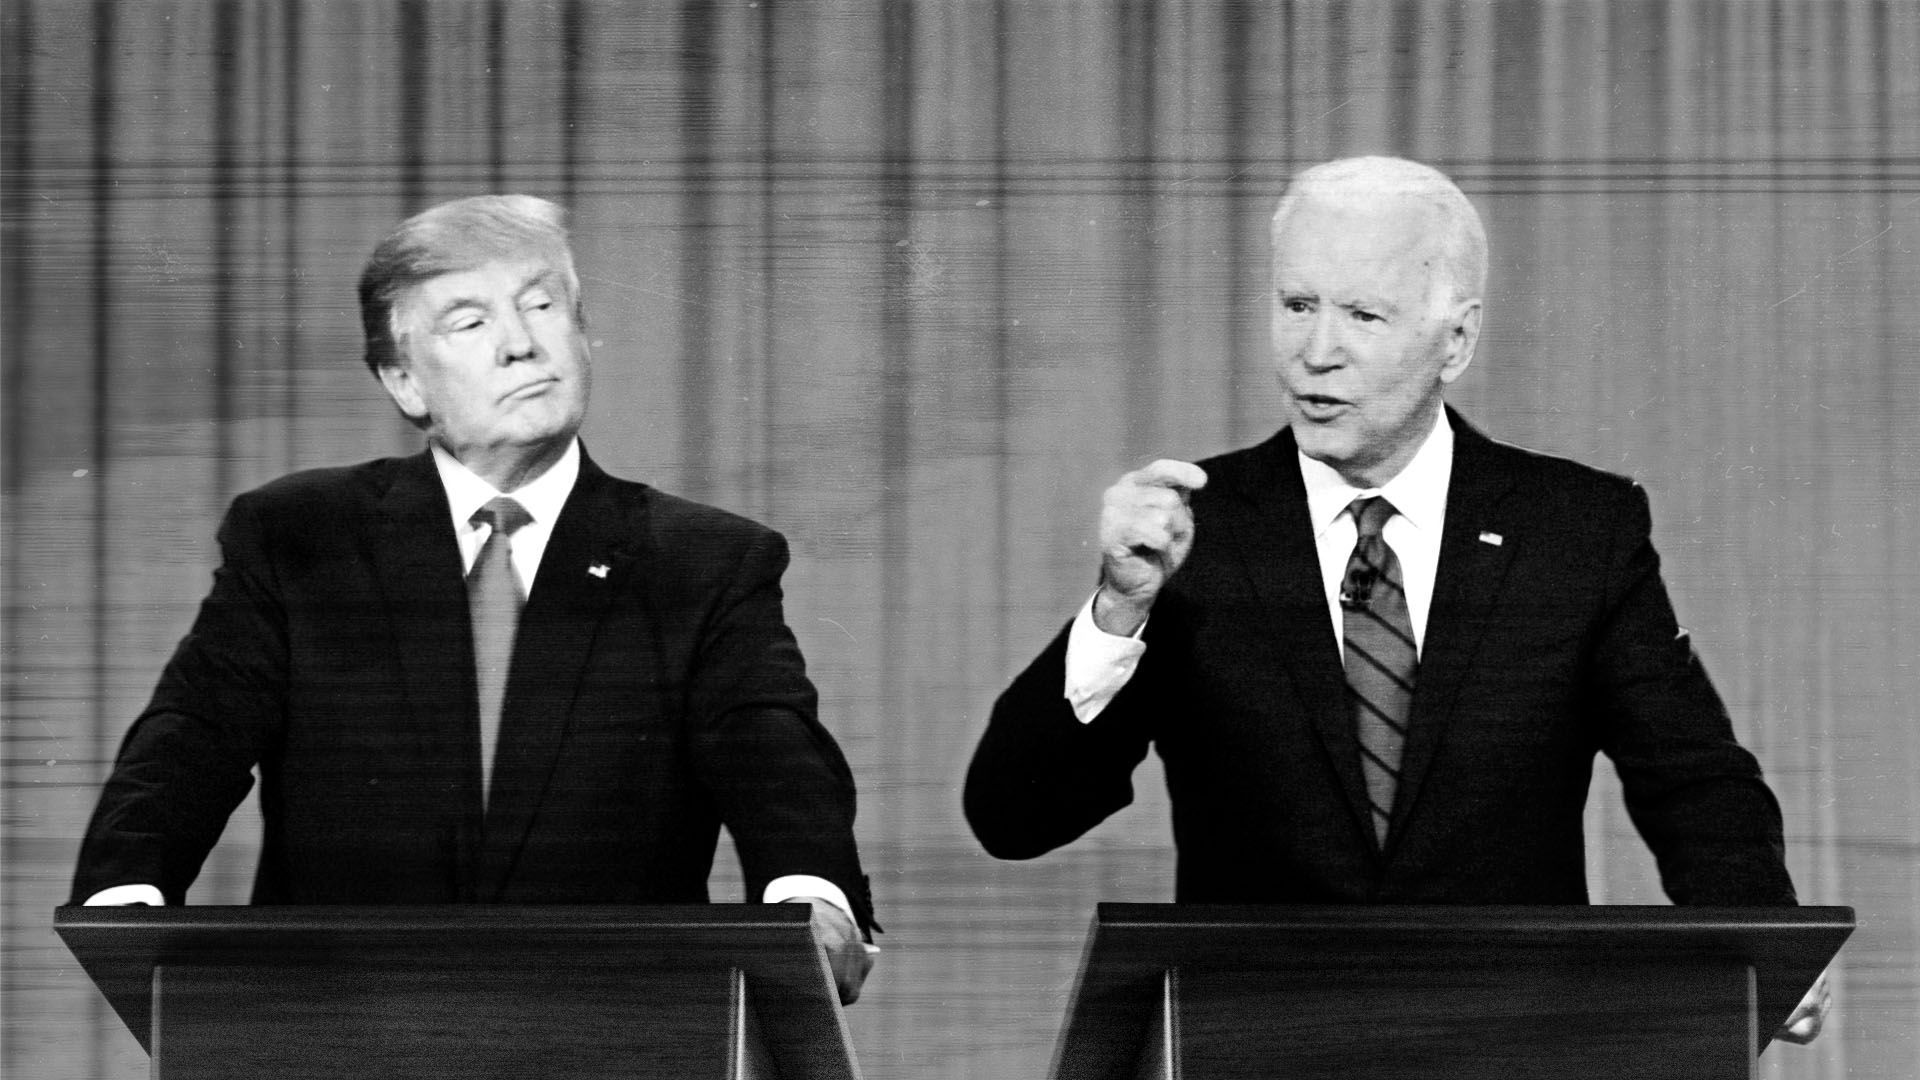 Photo illustration of Donald Trump and Joseph Biden in a vintage-looking televised debate